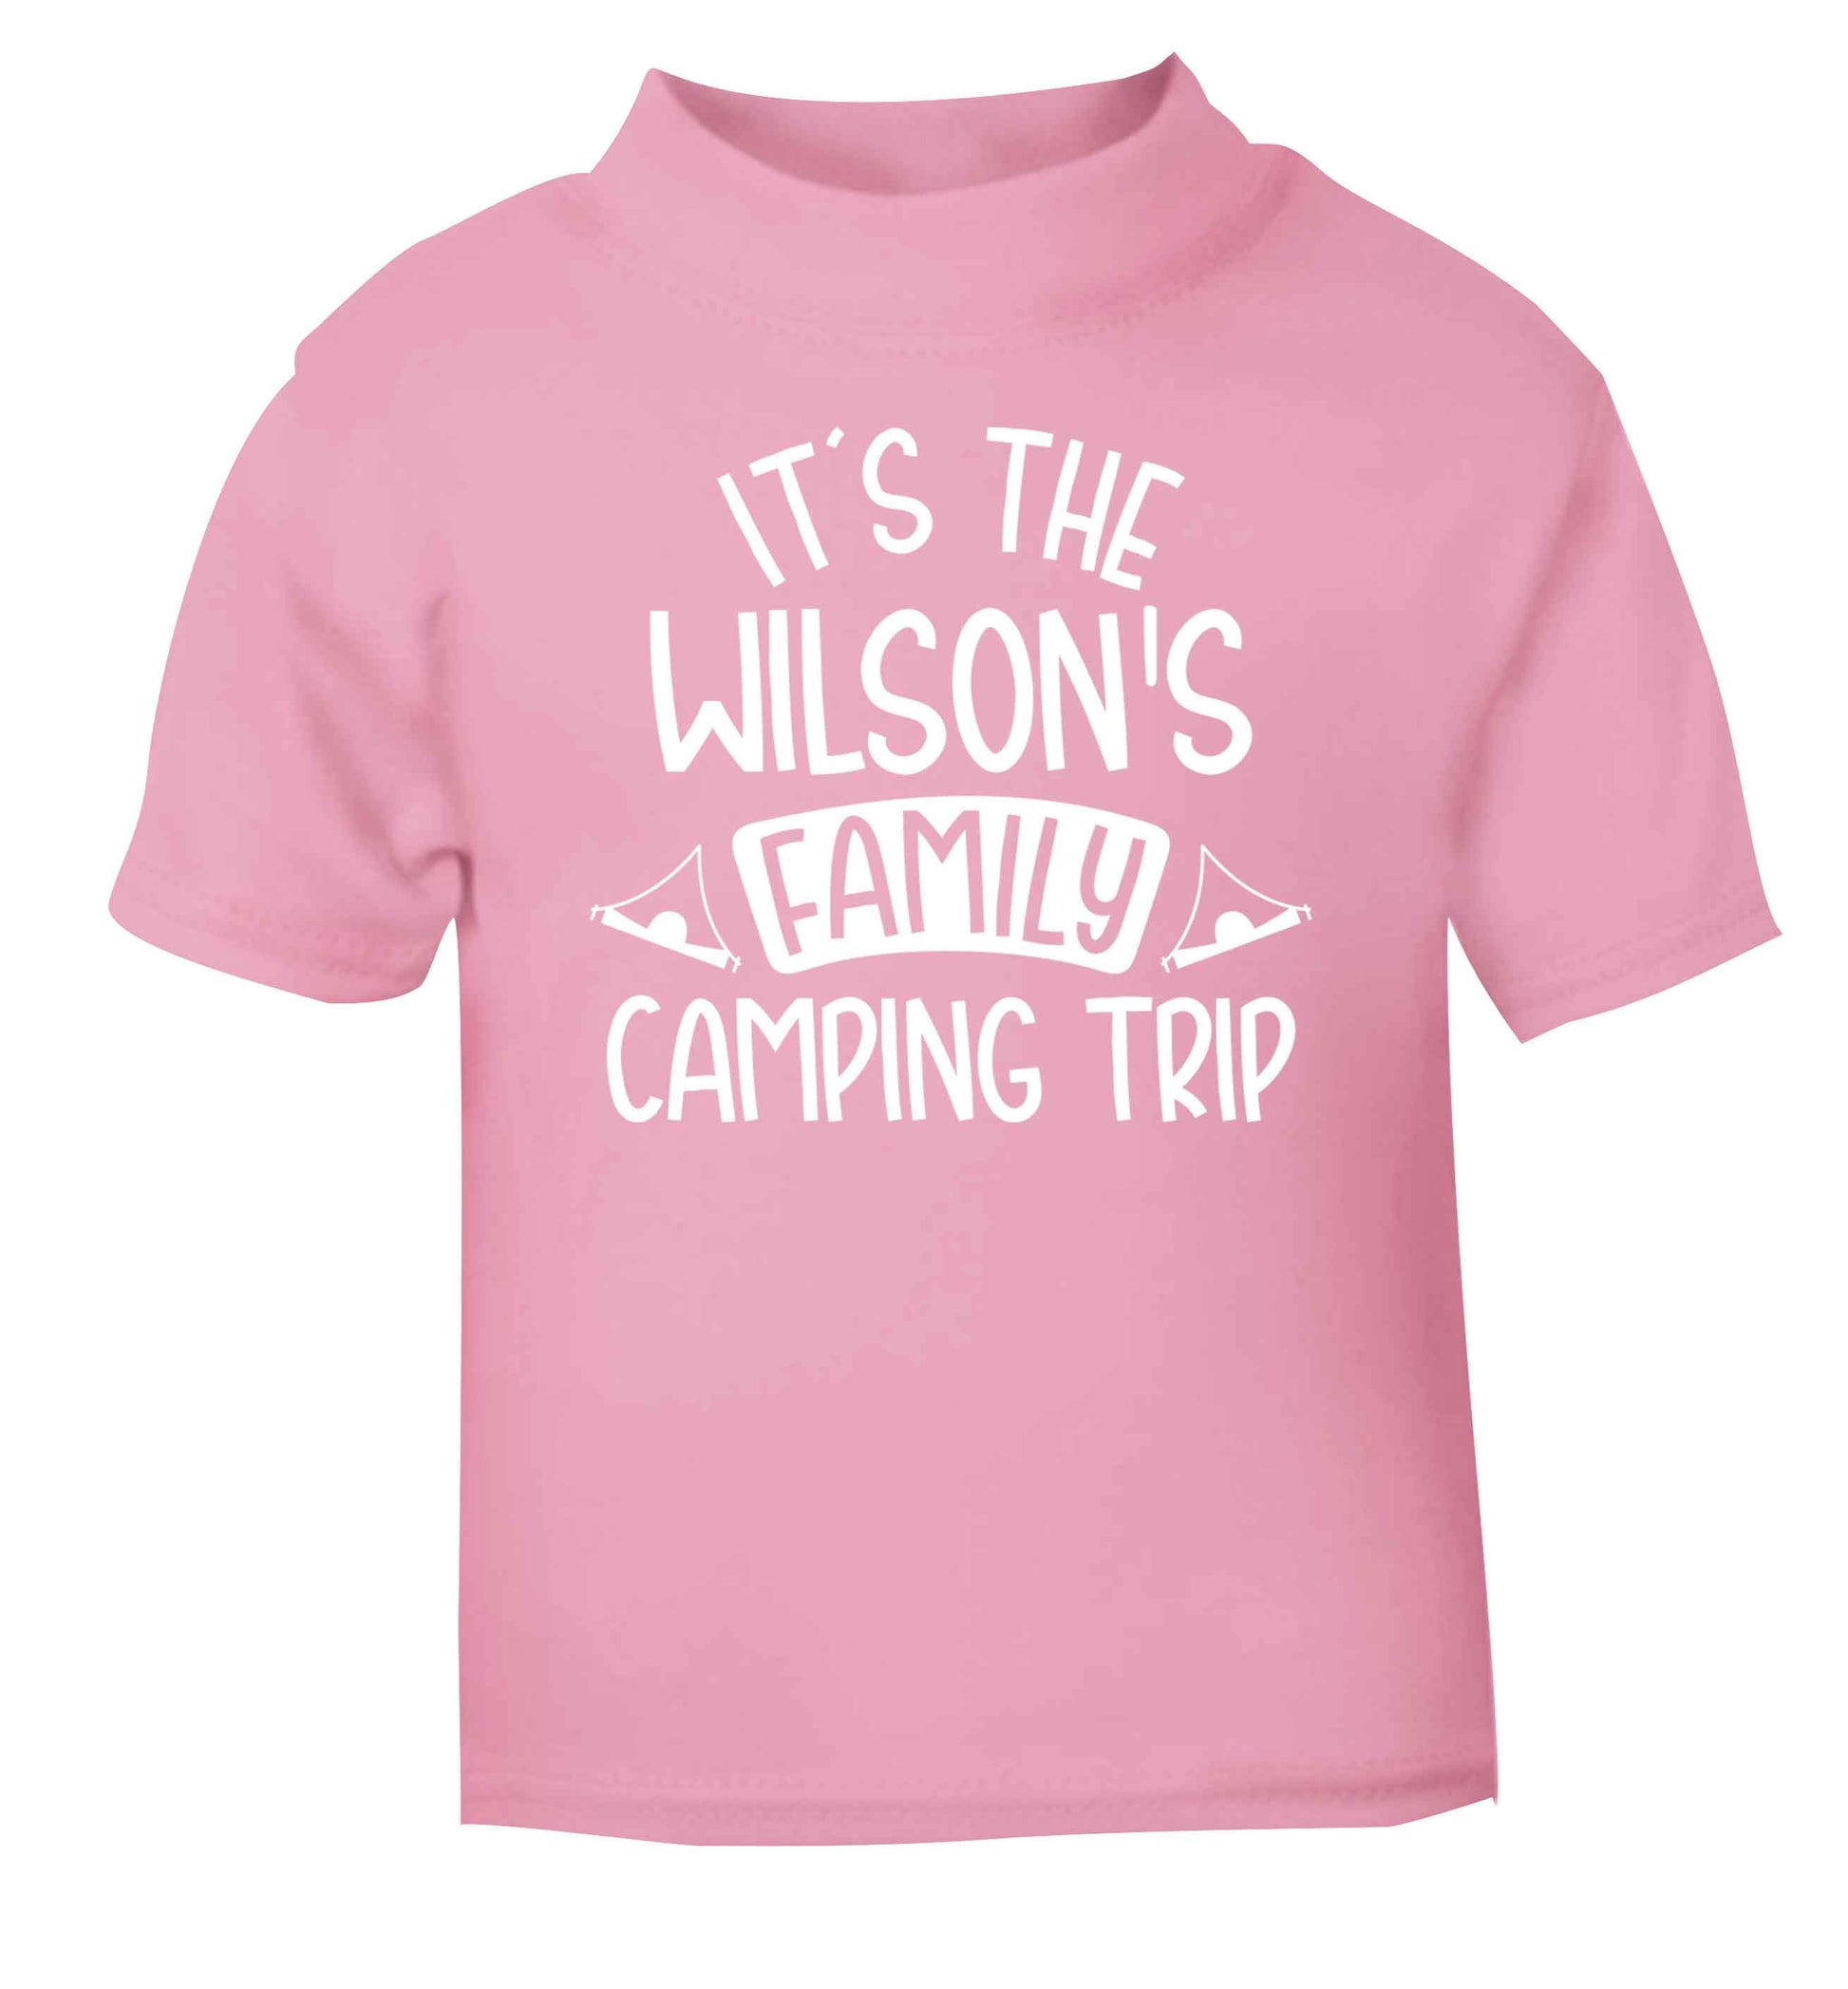 It's the Wilson's family camping trip personalised light pink Baby Toddler Tshirt 2 Years